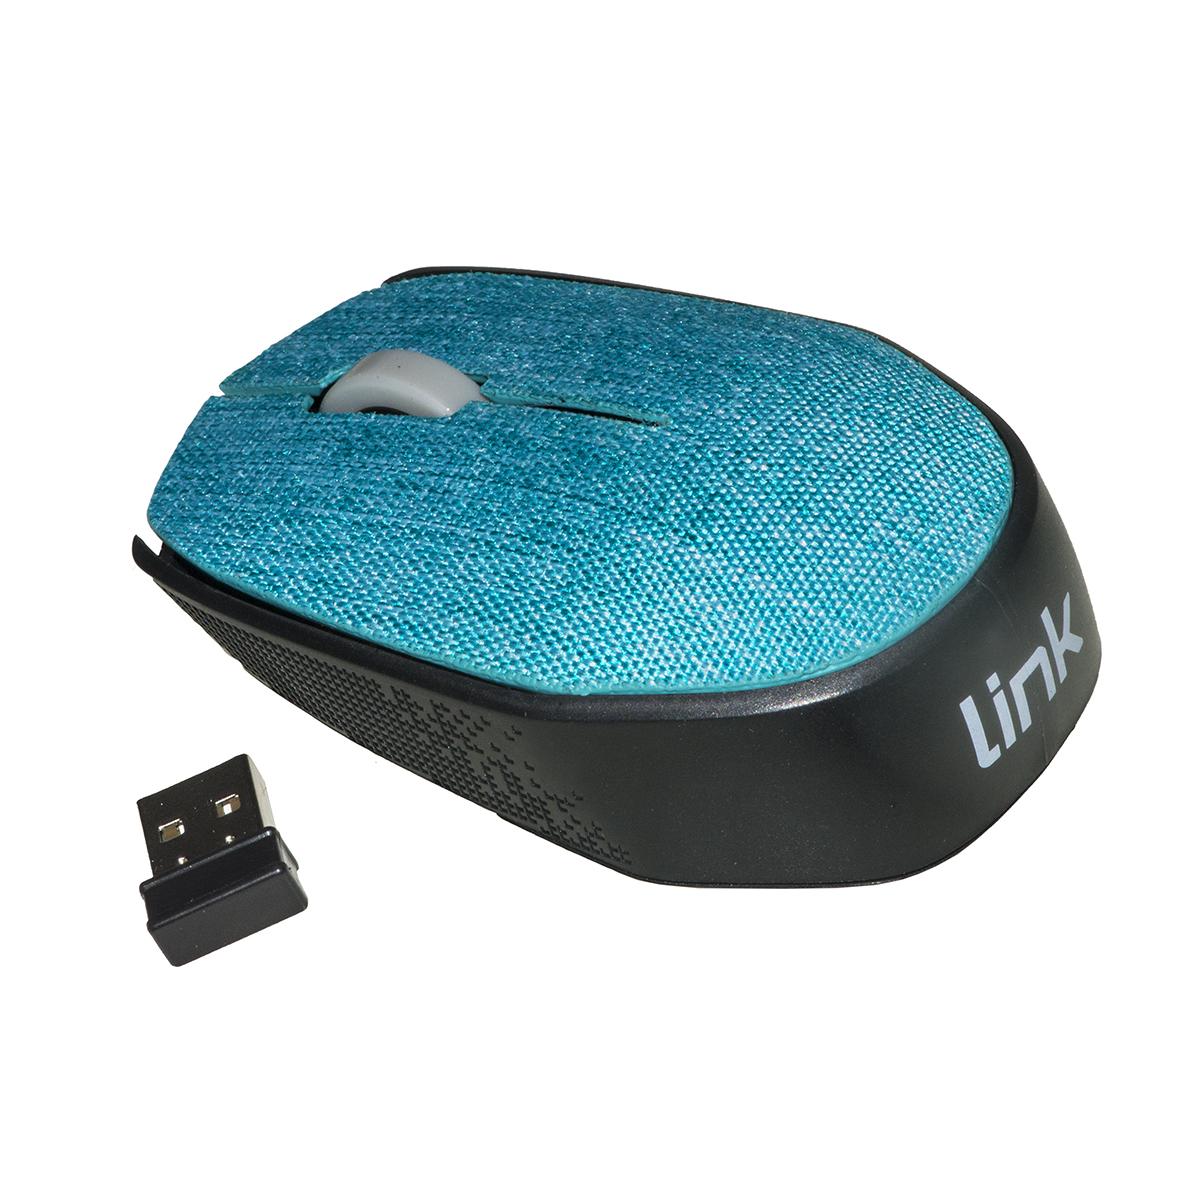 Link Mouse Wireless In